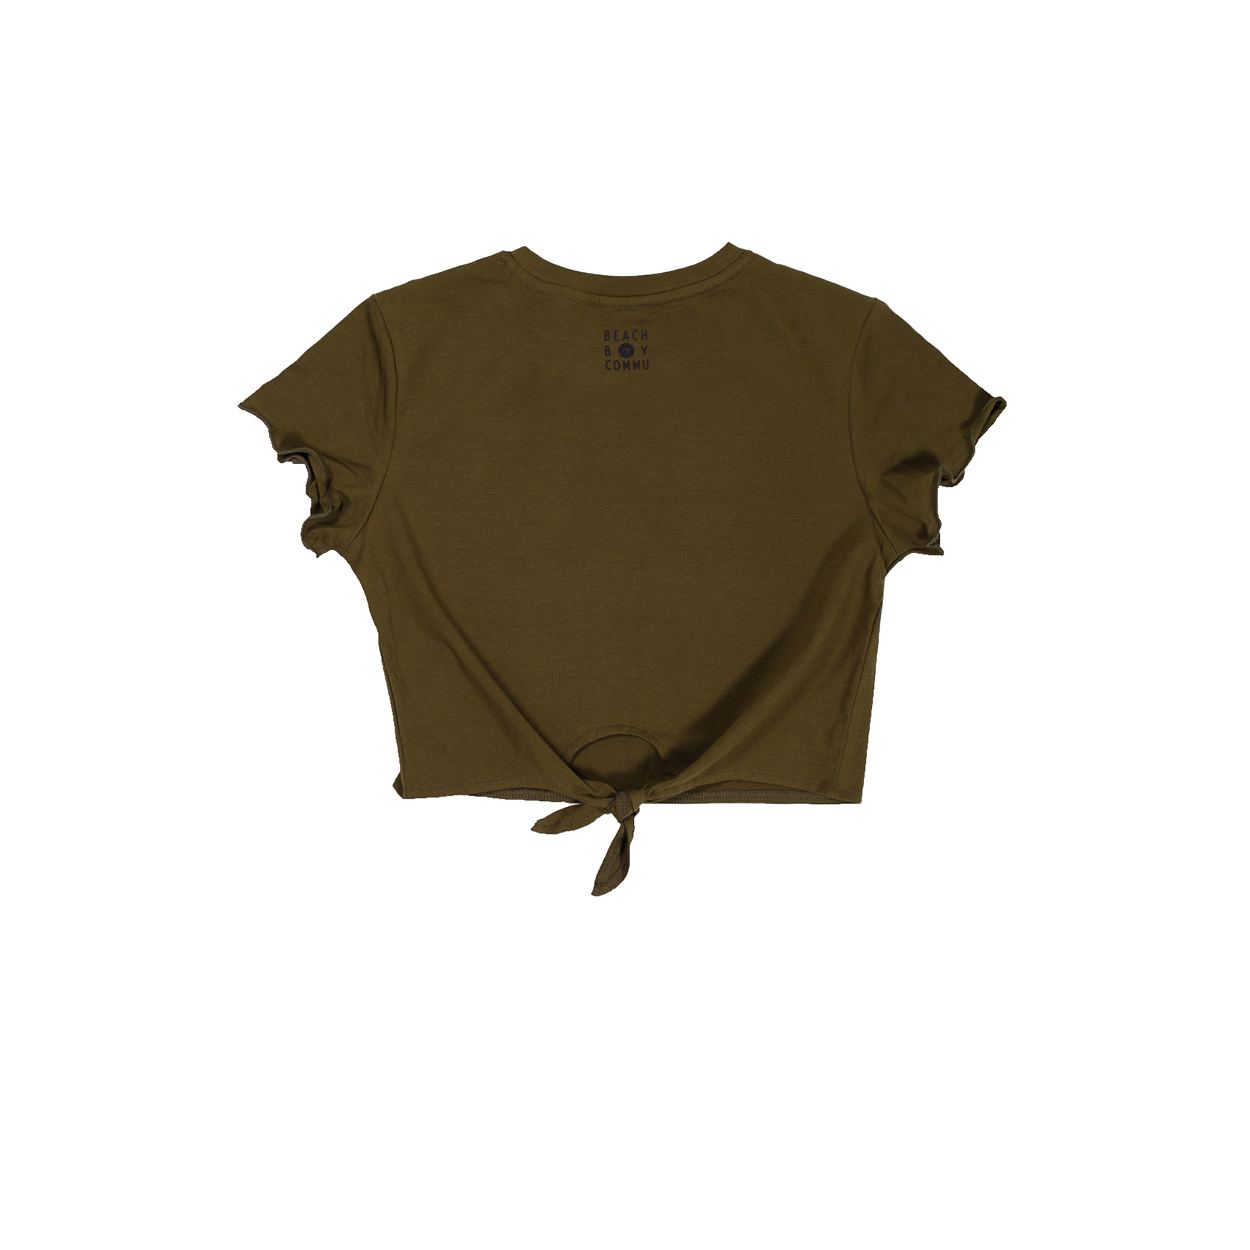 Olive green cropped tee shirt